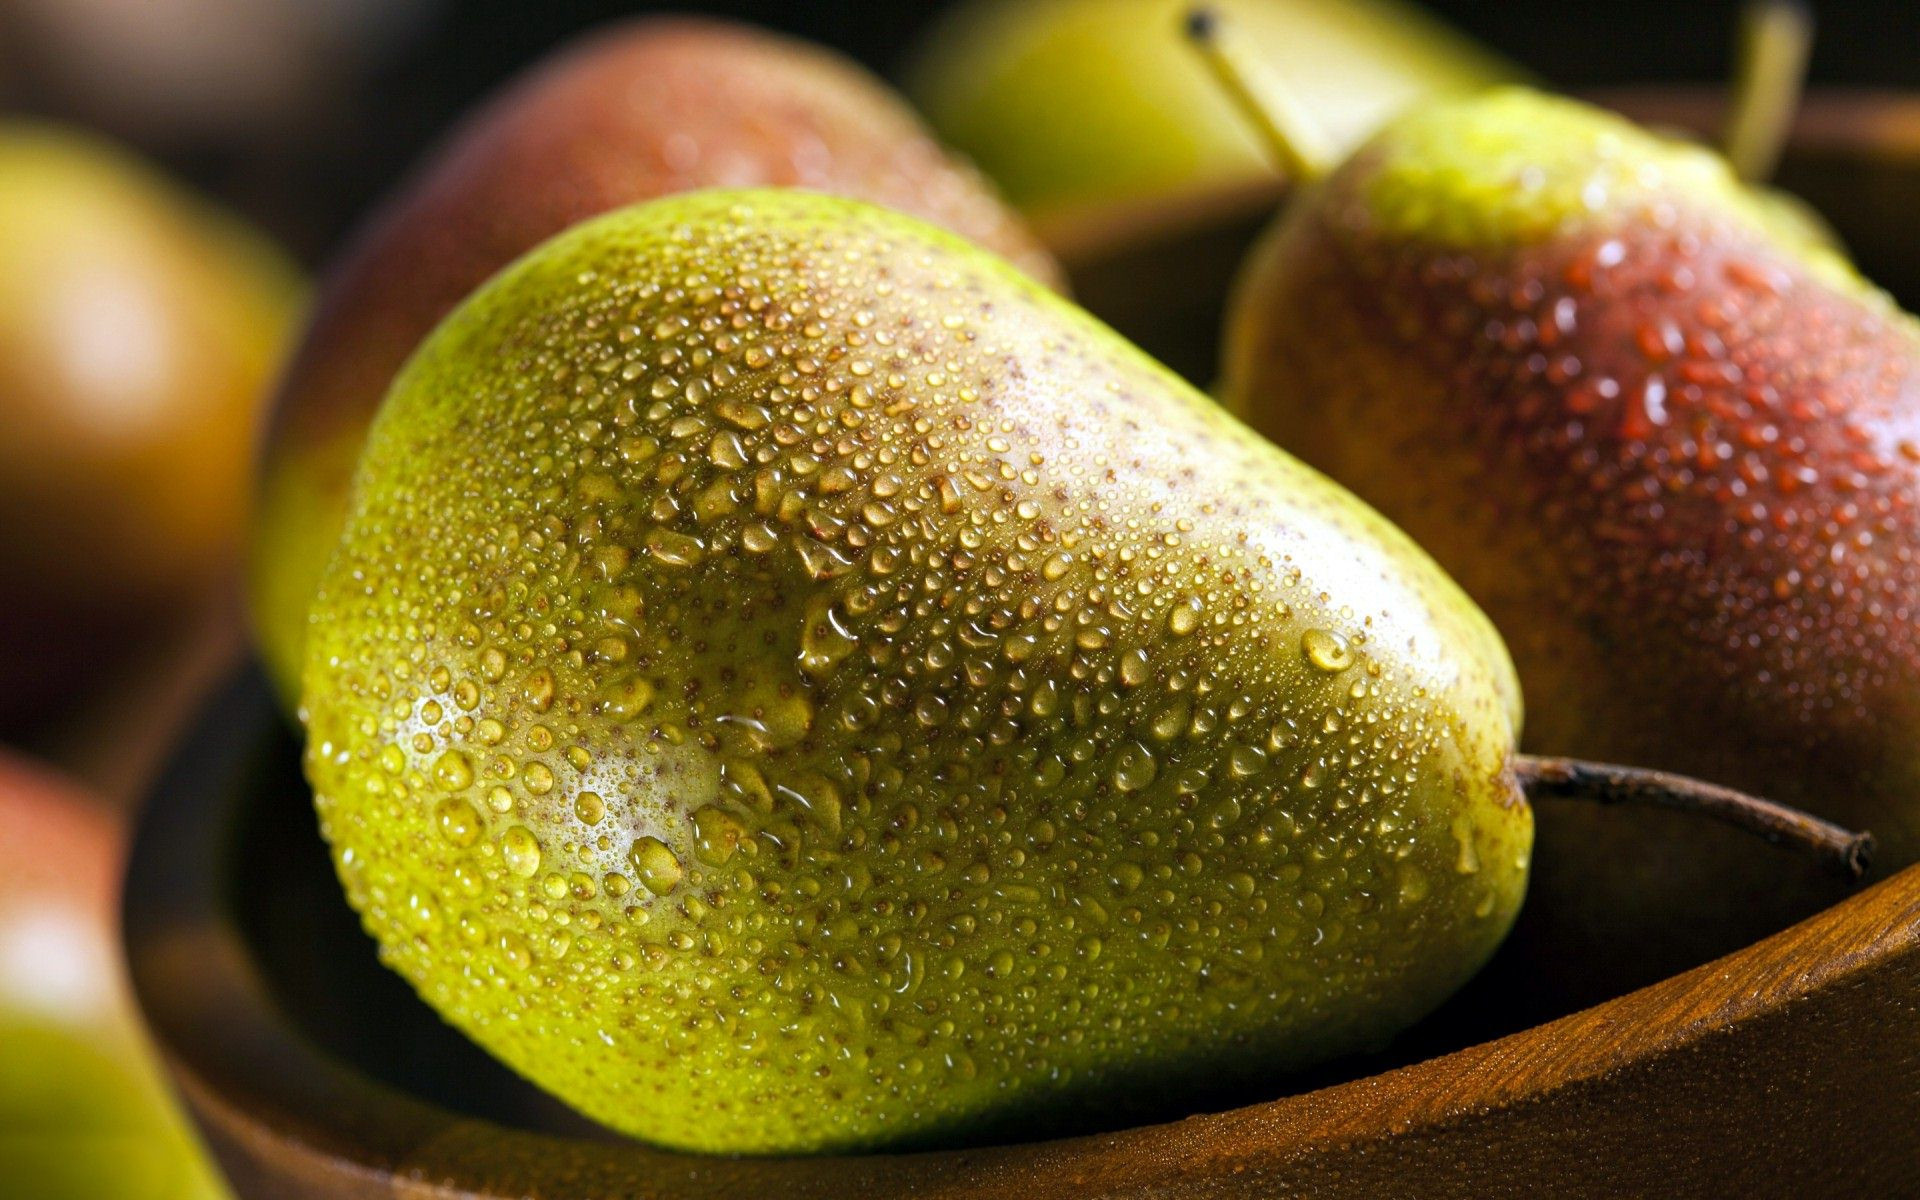 Pear fruit, Wallpaper background, Aesthetic appeal, Delicious and tempting, 1920x1200 HD Desktop